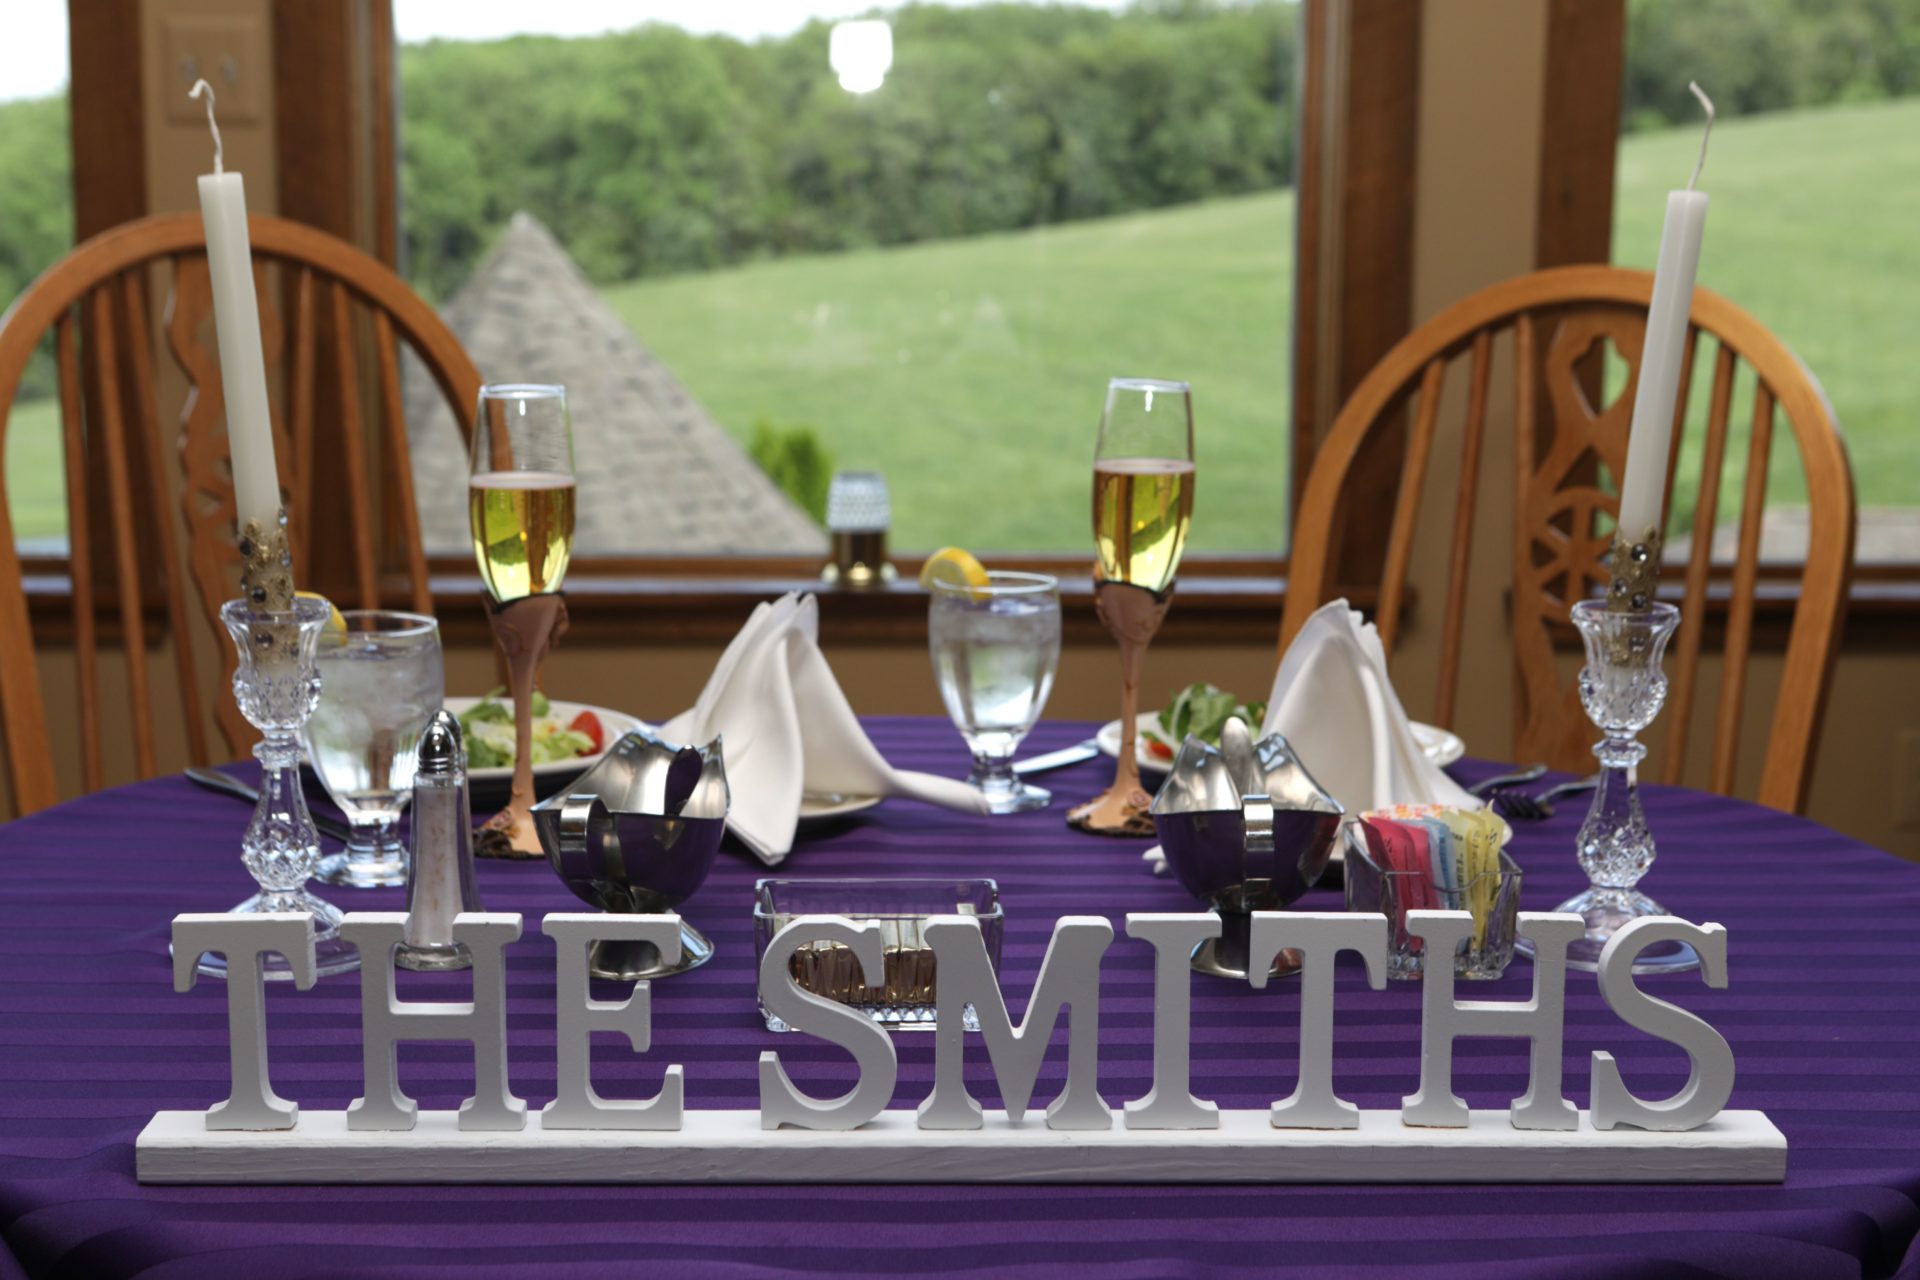 Head table decoration of couples new last name during tea party theme wedding in Frederick